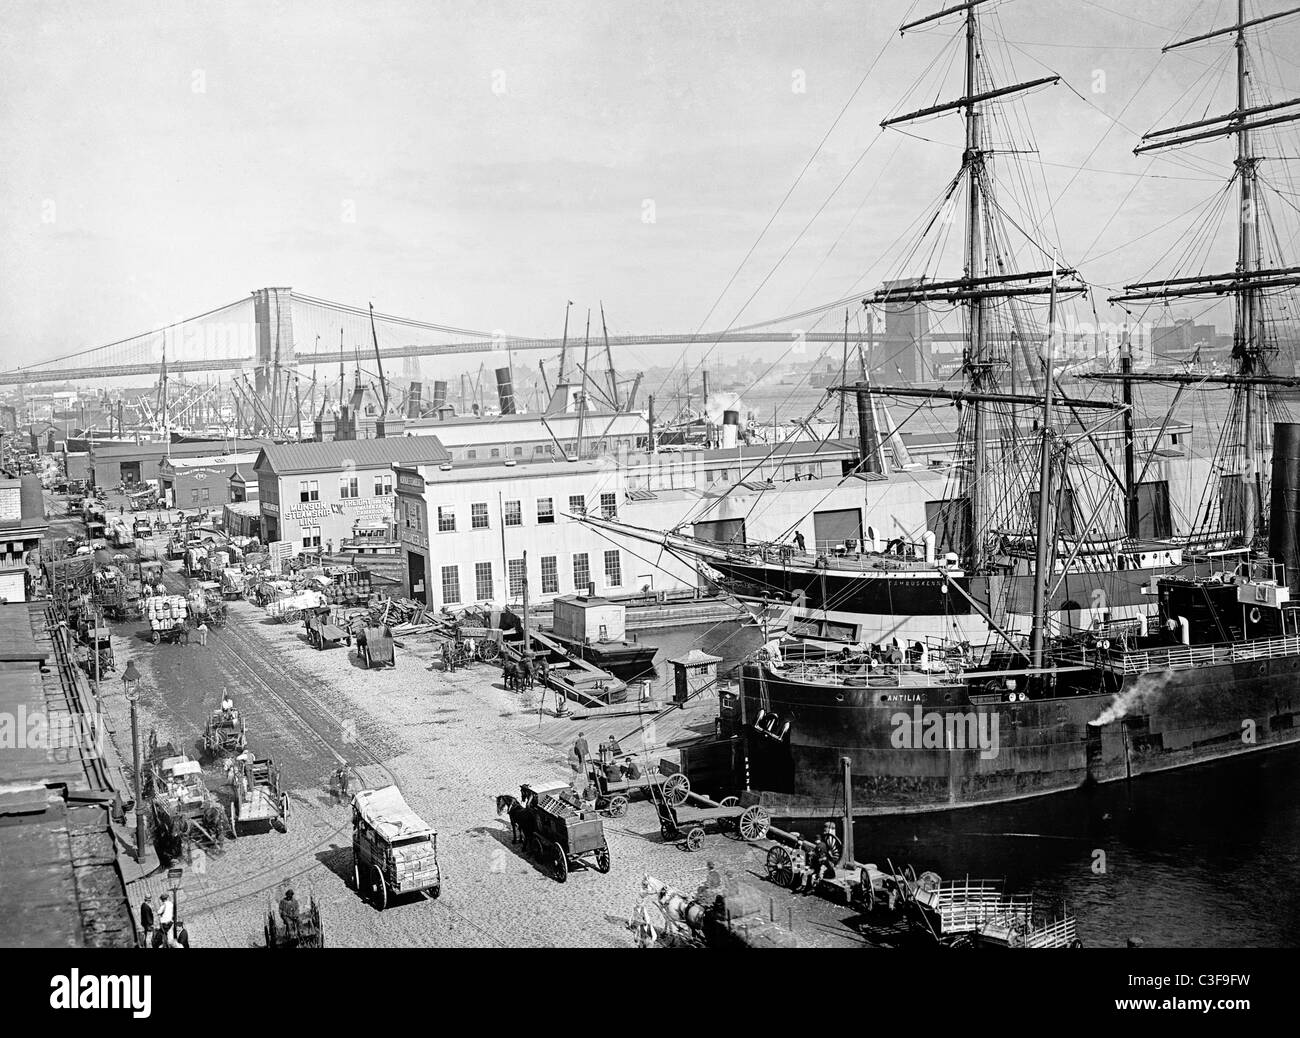 South Street Seaport New York City 1900 Banque D'Images